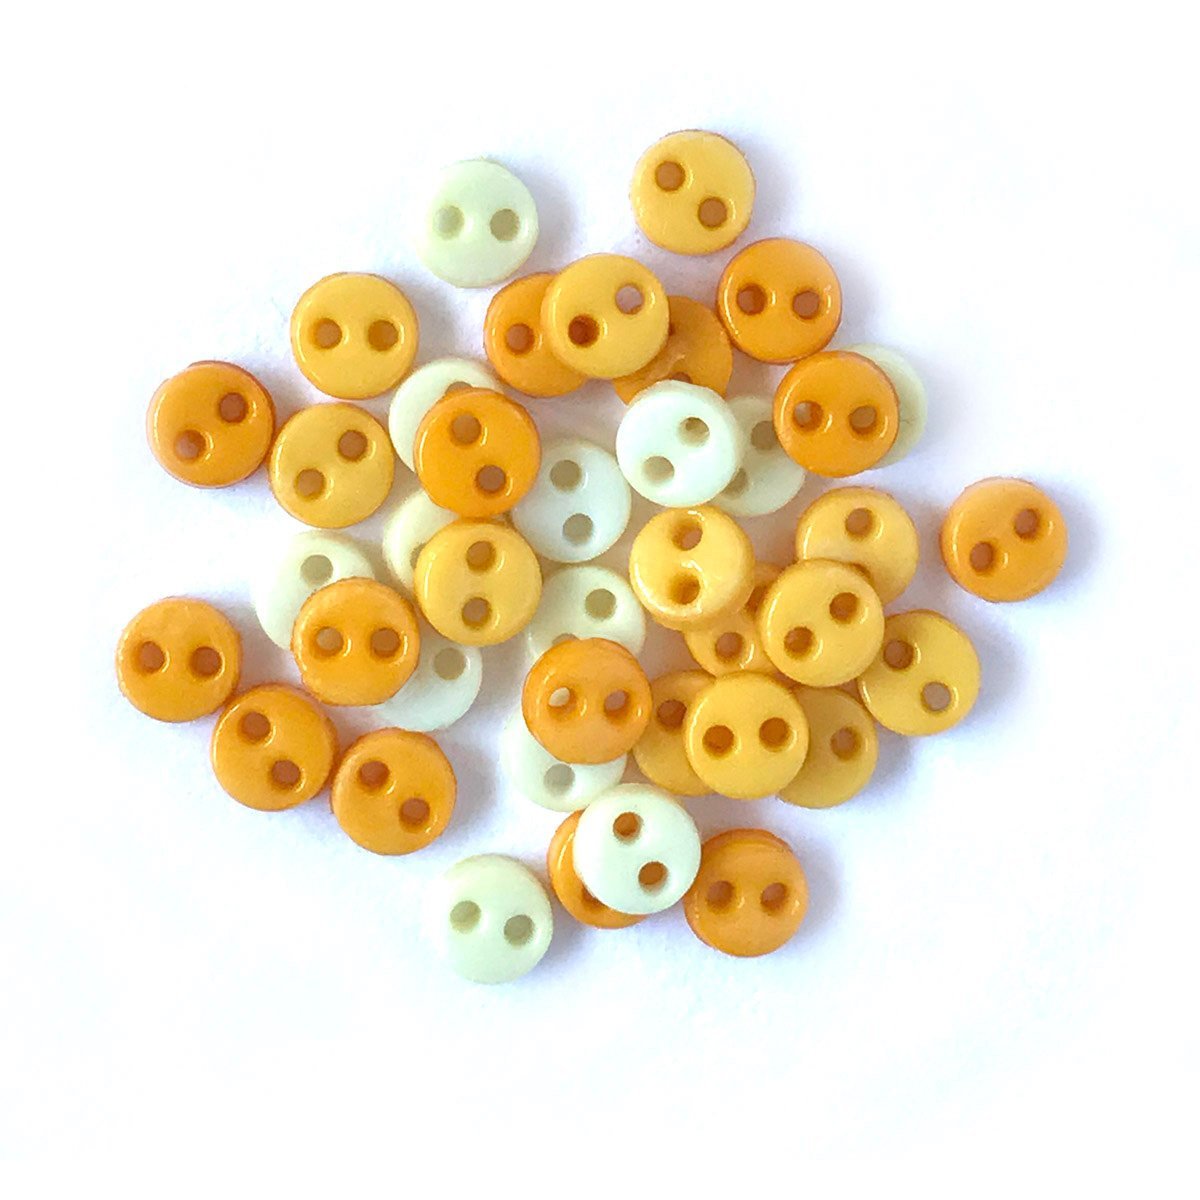 500pcs/lot 6mm 2 holes Round Resin Mini Tiny Buttons Sewing Decorative  Button DIY Scrapbooking Garment Tools Apparel Accessories